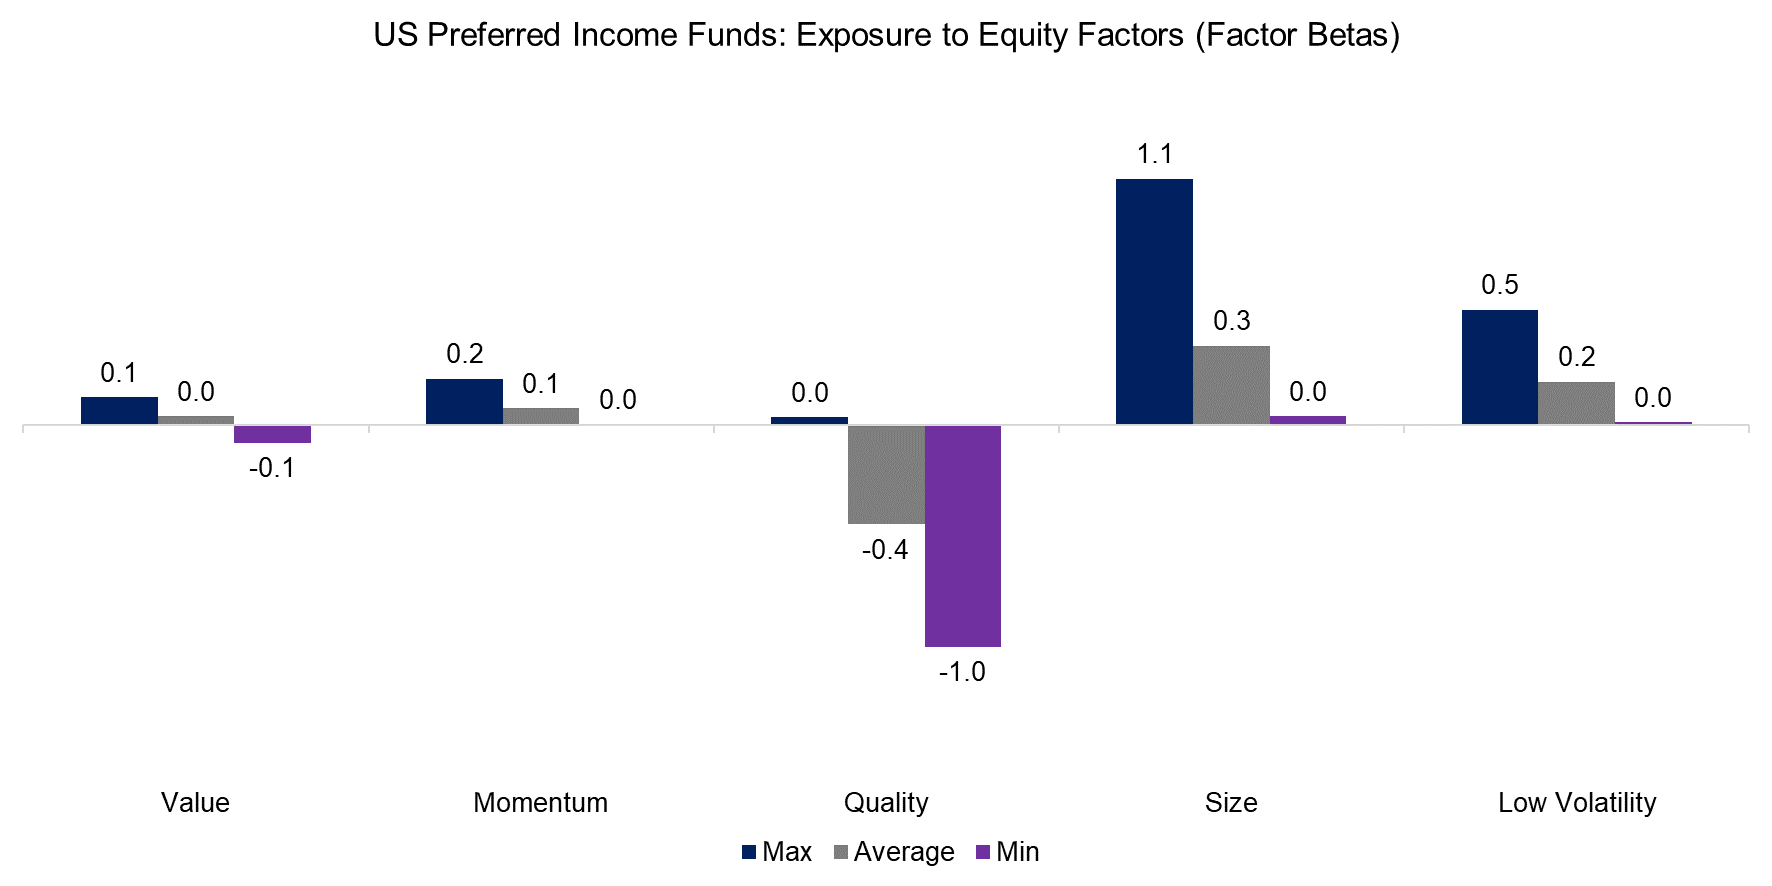 US Preferred Income Funds Exposure to Equity Factors (Factor Betas)